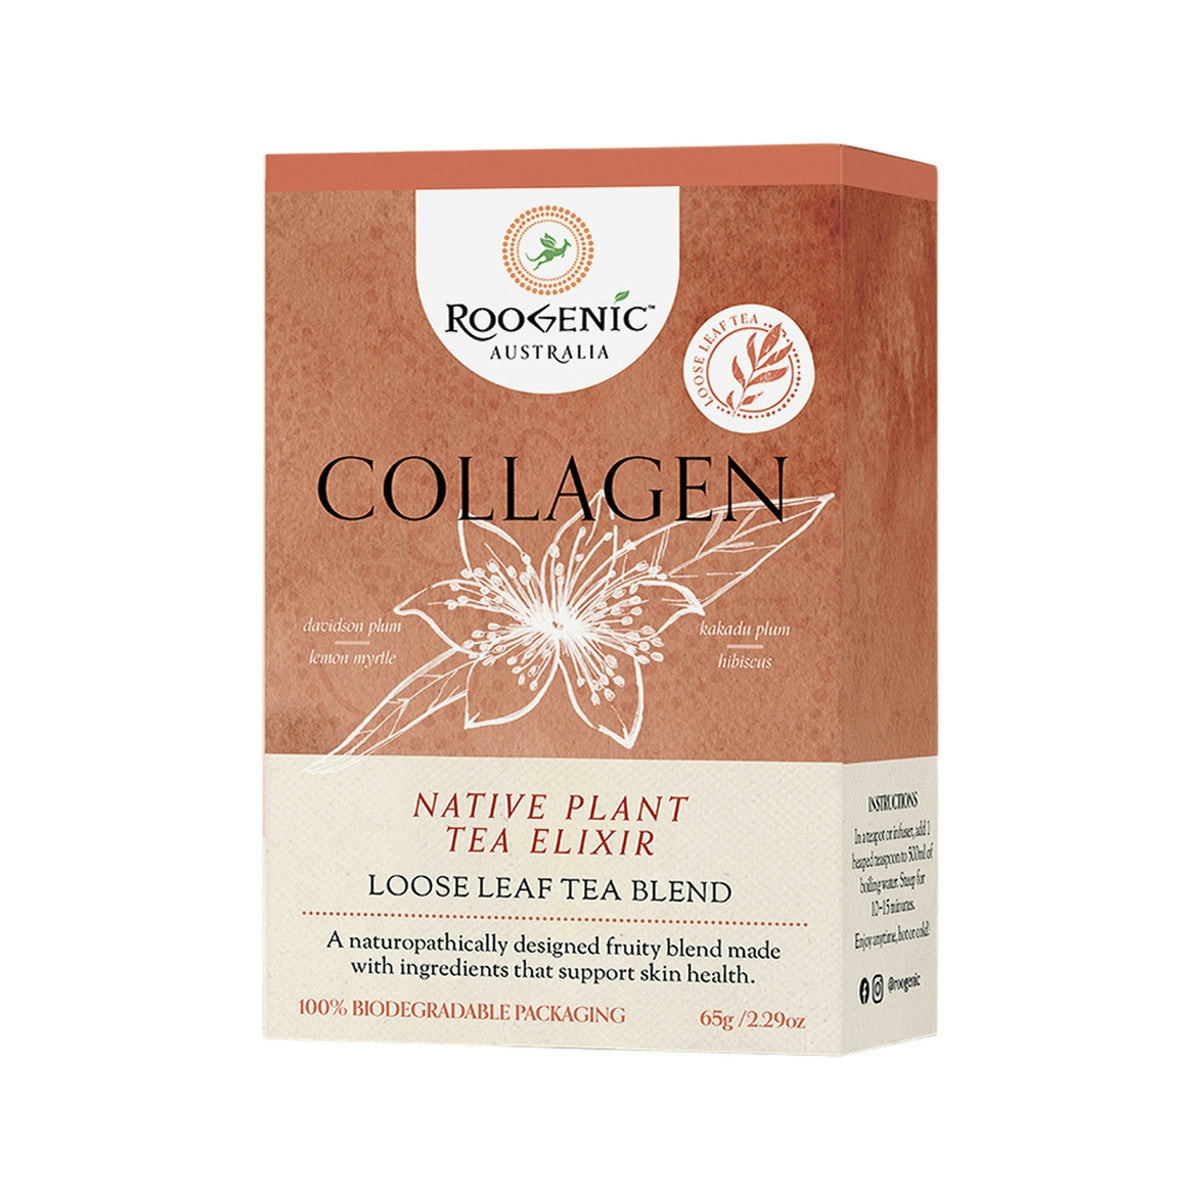 image of Roogenic Australia Collagen Native Plant Tea Elixir Loose Leaf 65g with white background 